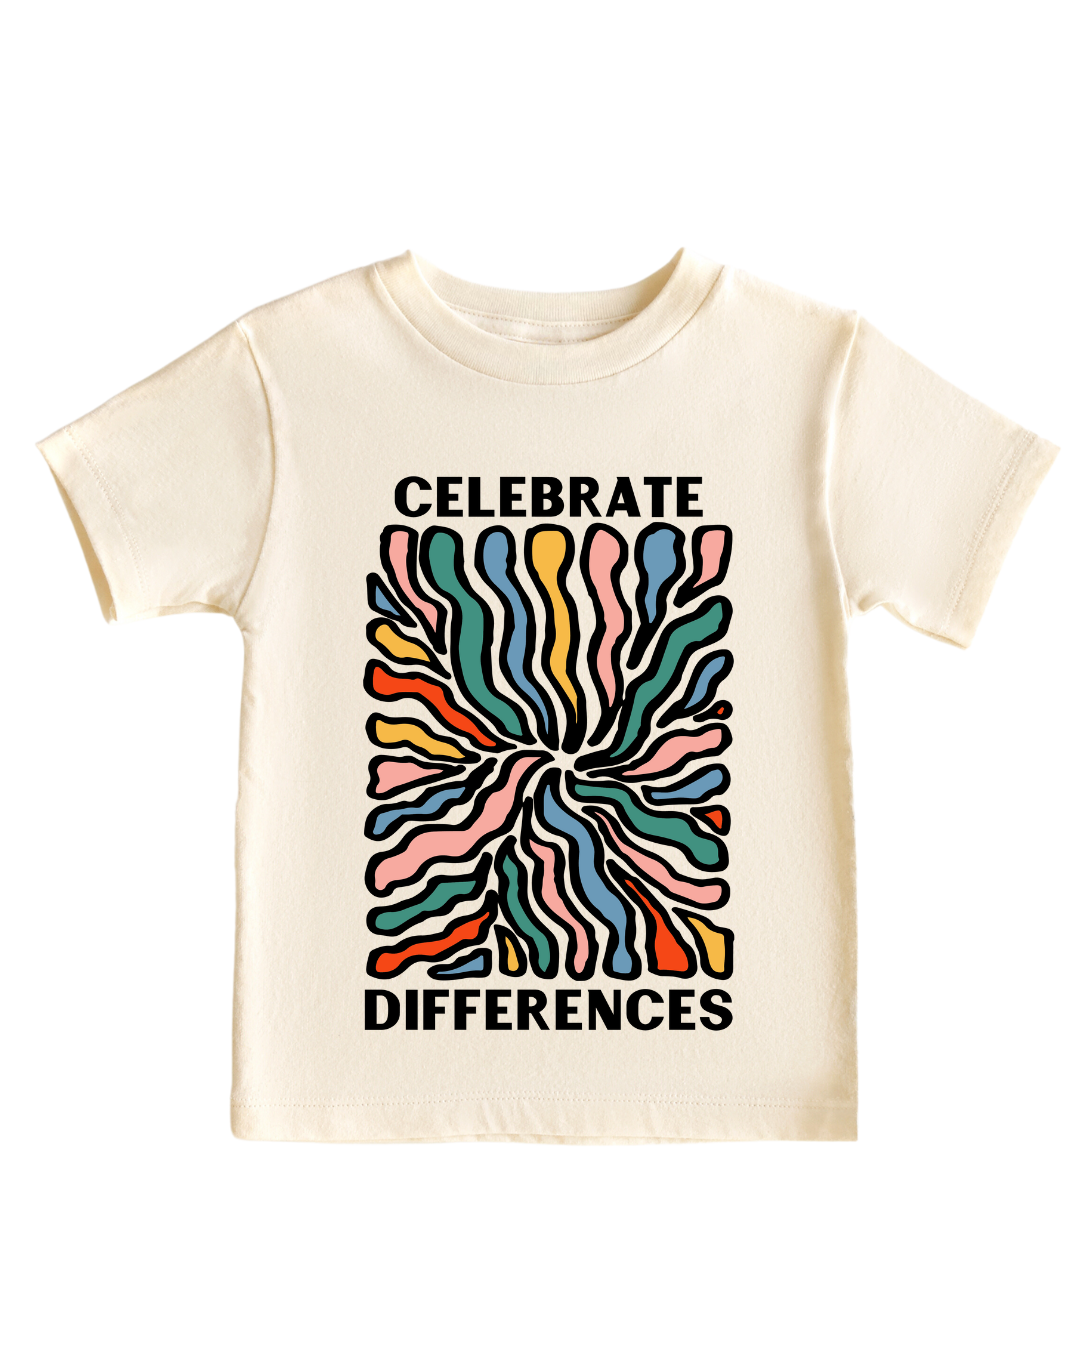 Celebrate Differences Children’s Tee